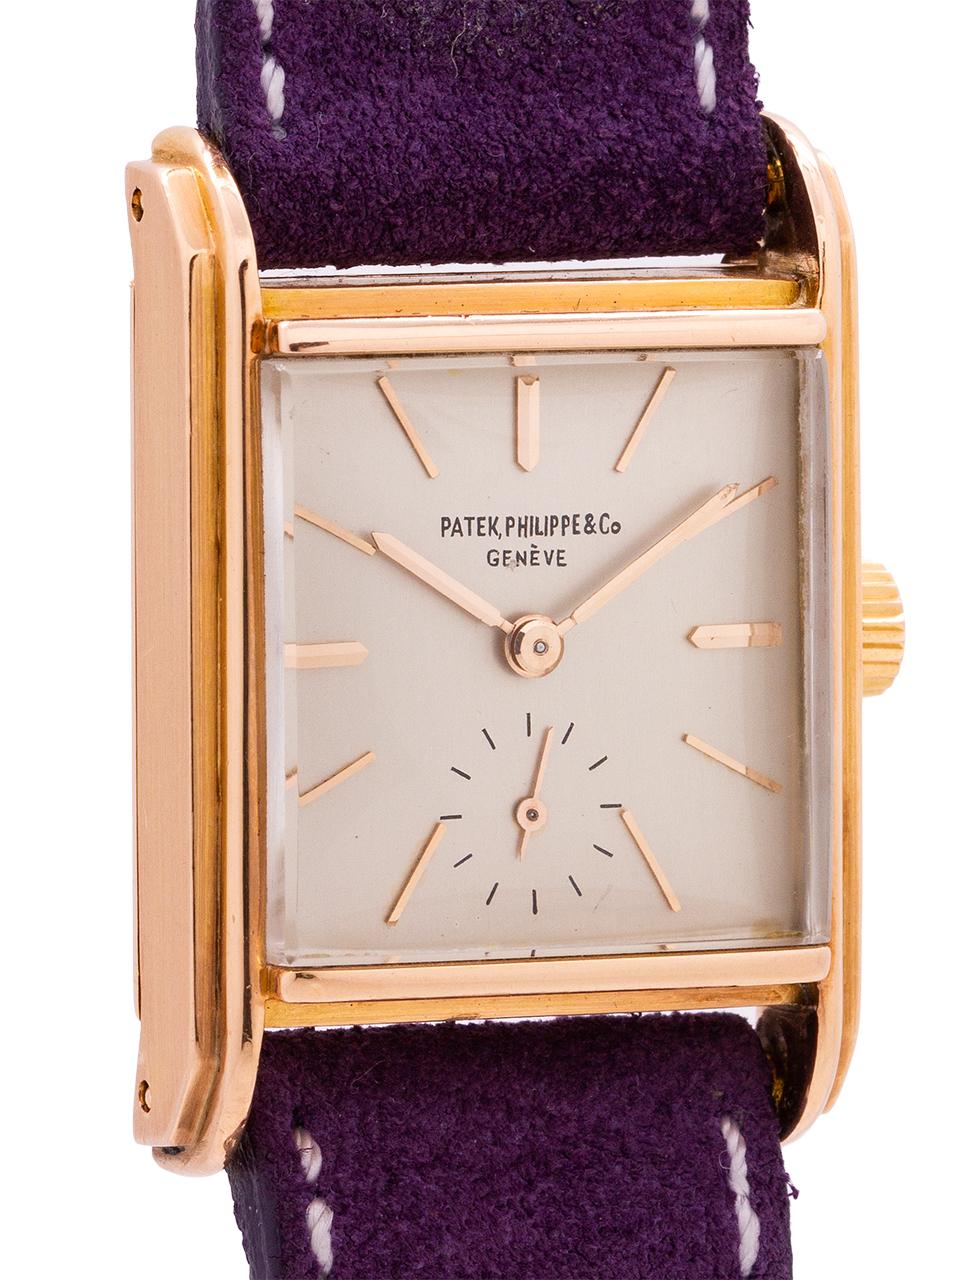 
A very attractive vintage Patek 18K rose gold rectangle case dress model circa 1946. With a nicely proportioned, thick 26 x 37mm case with raised stepped bezel and extended lugs. Silver satin dial, applied pink indexes and pink baton hands. The